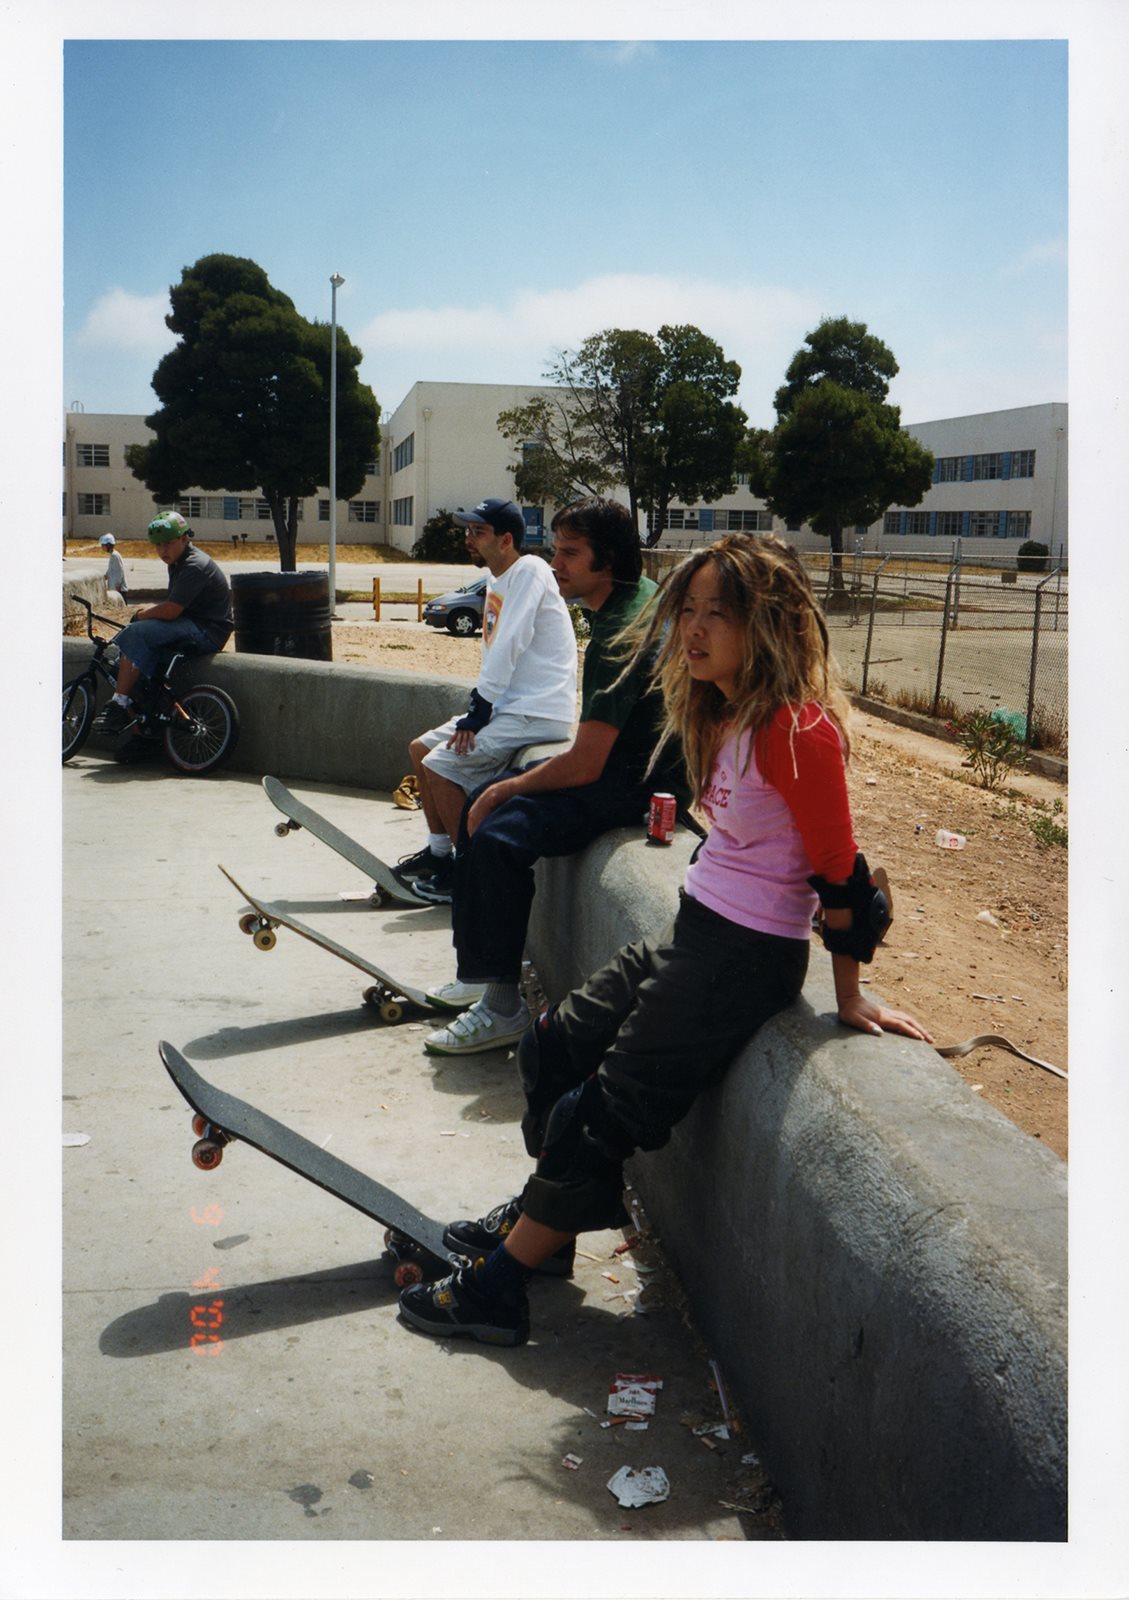 The Skateboarders Project (7)